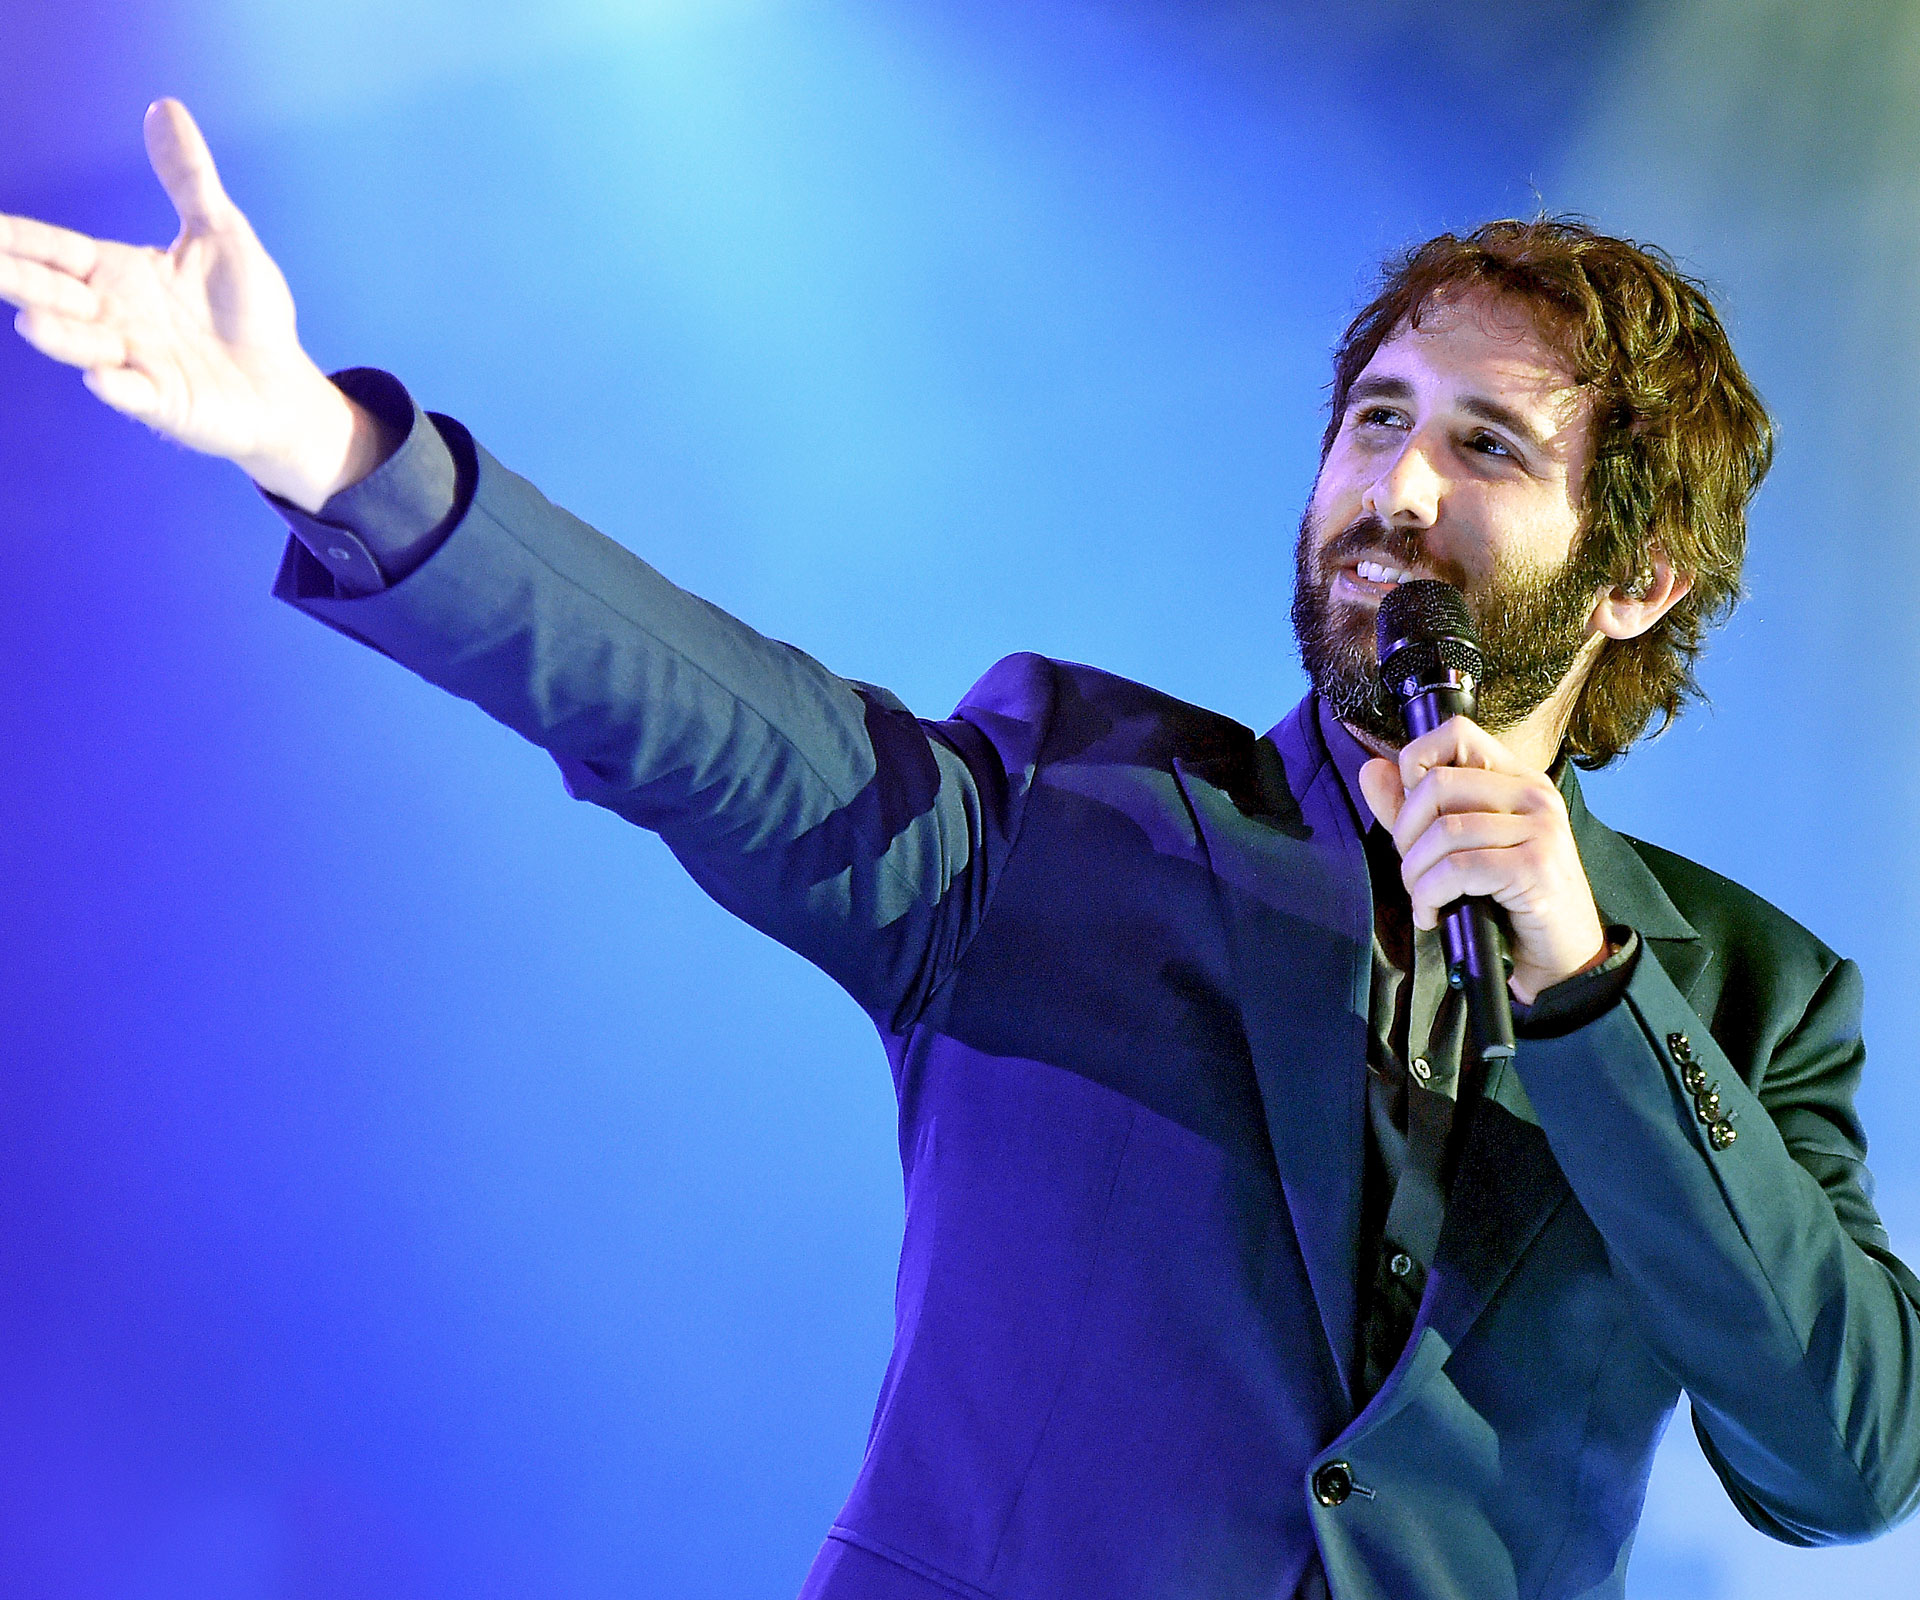 One night in NZ: Josh Groban’s special place